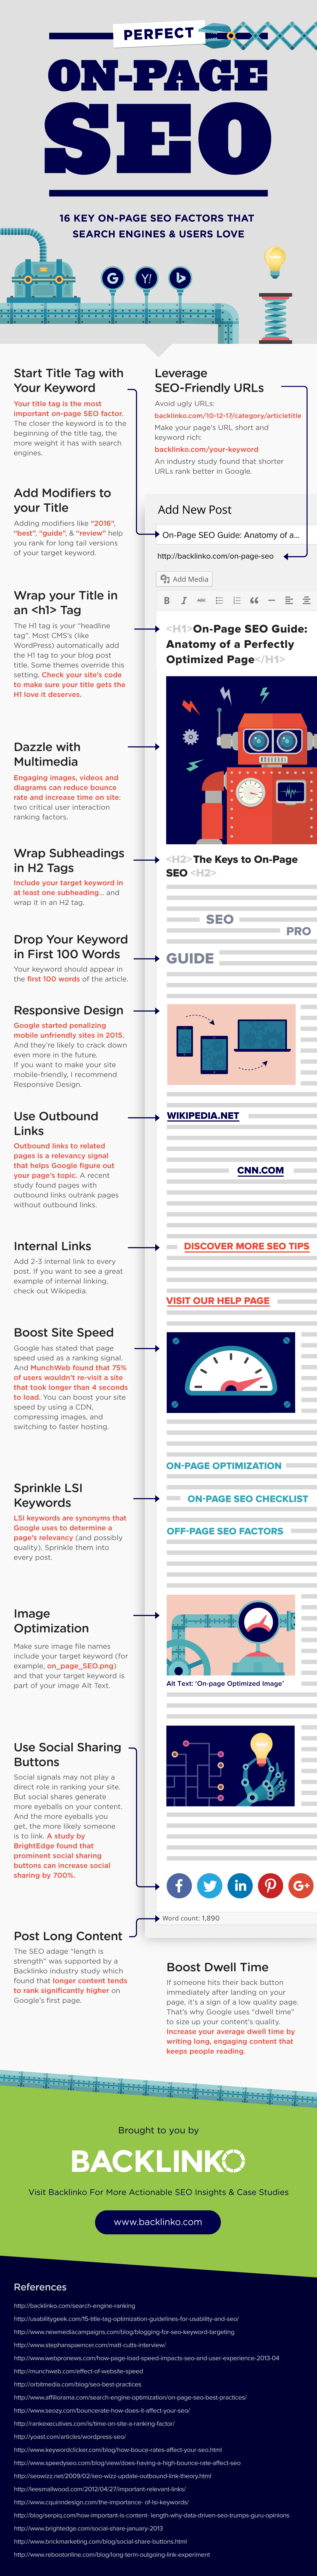 On-Page SEO Infographic